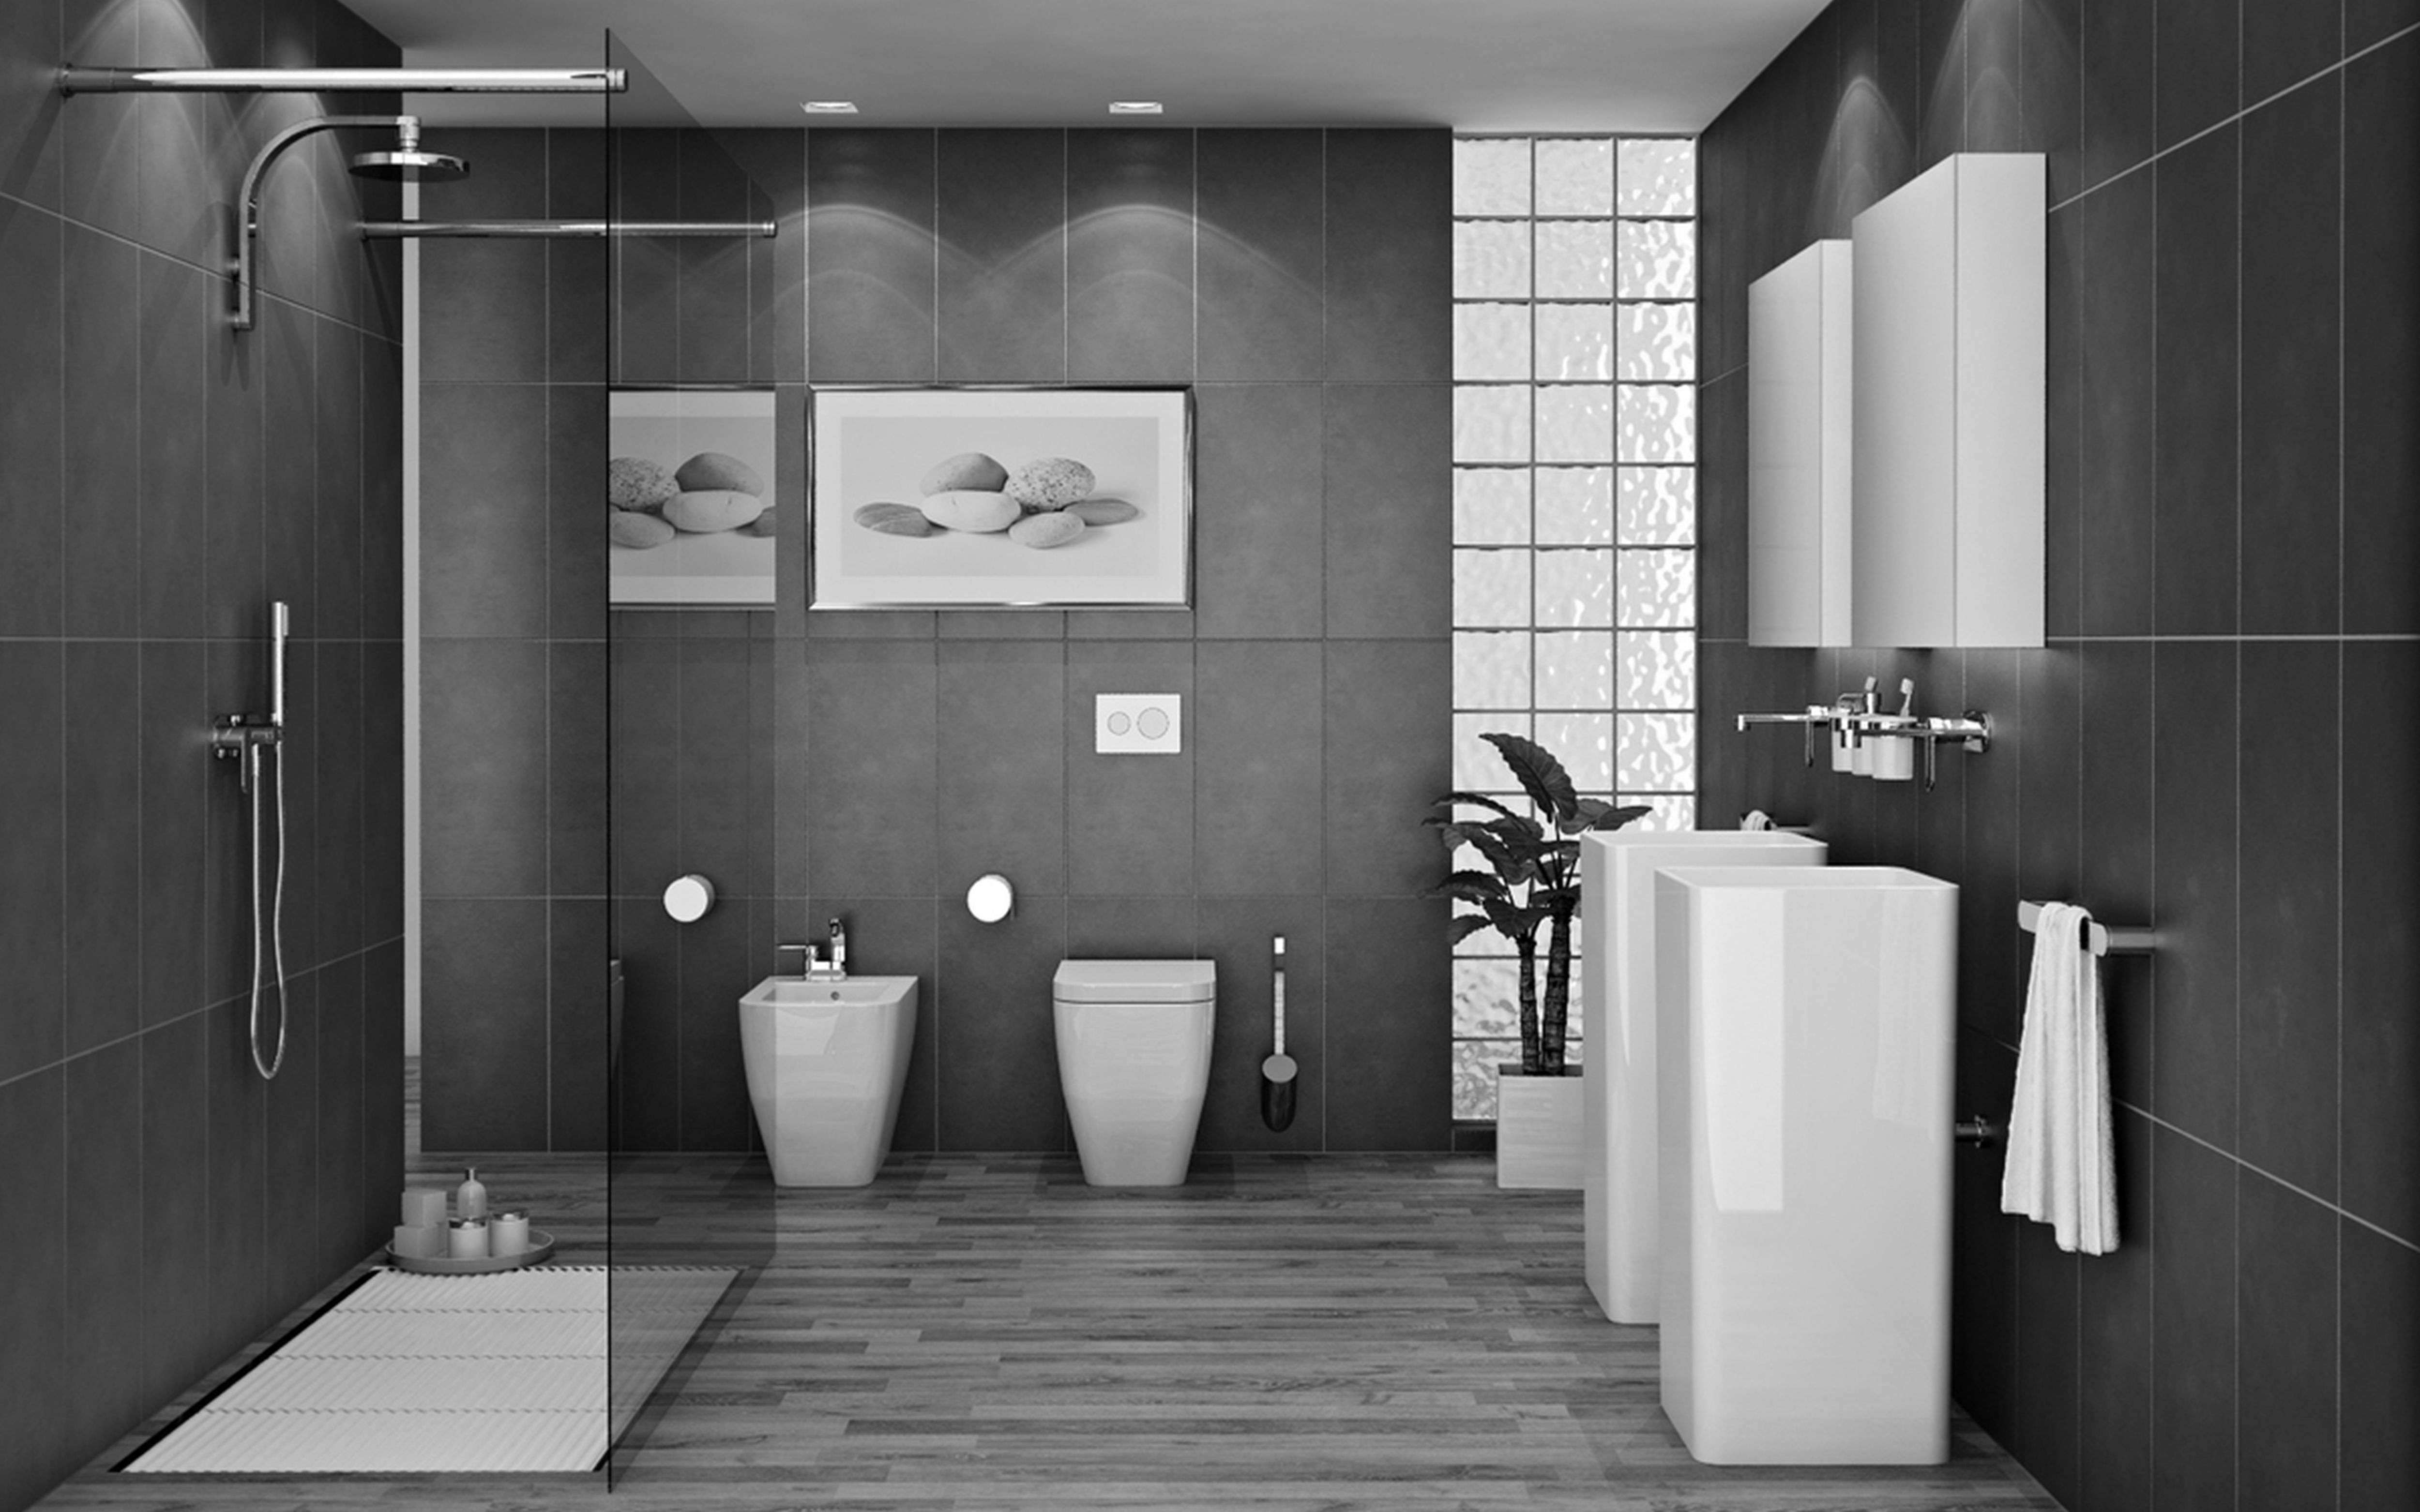 bathroom-glass-shower-stalls-and-double-white-wash-stand-on-the-floor-and-grey-wall-theme-bathroom-decorating-ideas-black-and-white-make-your-bathroom-look-contemporary